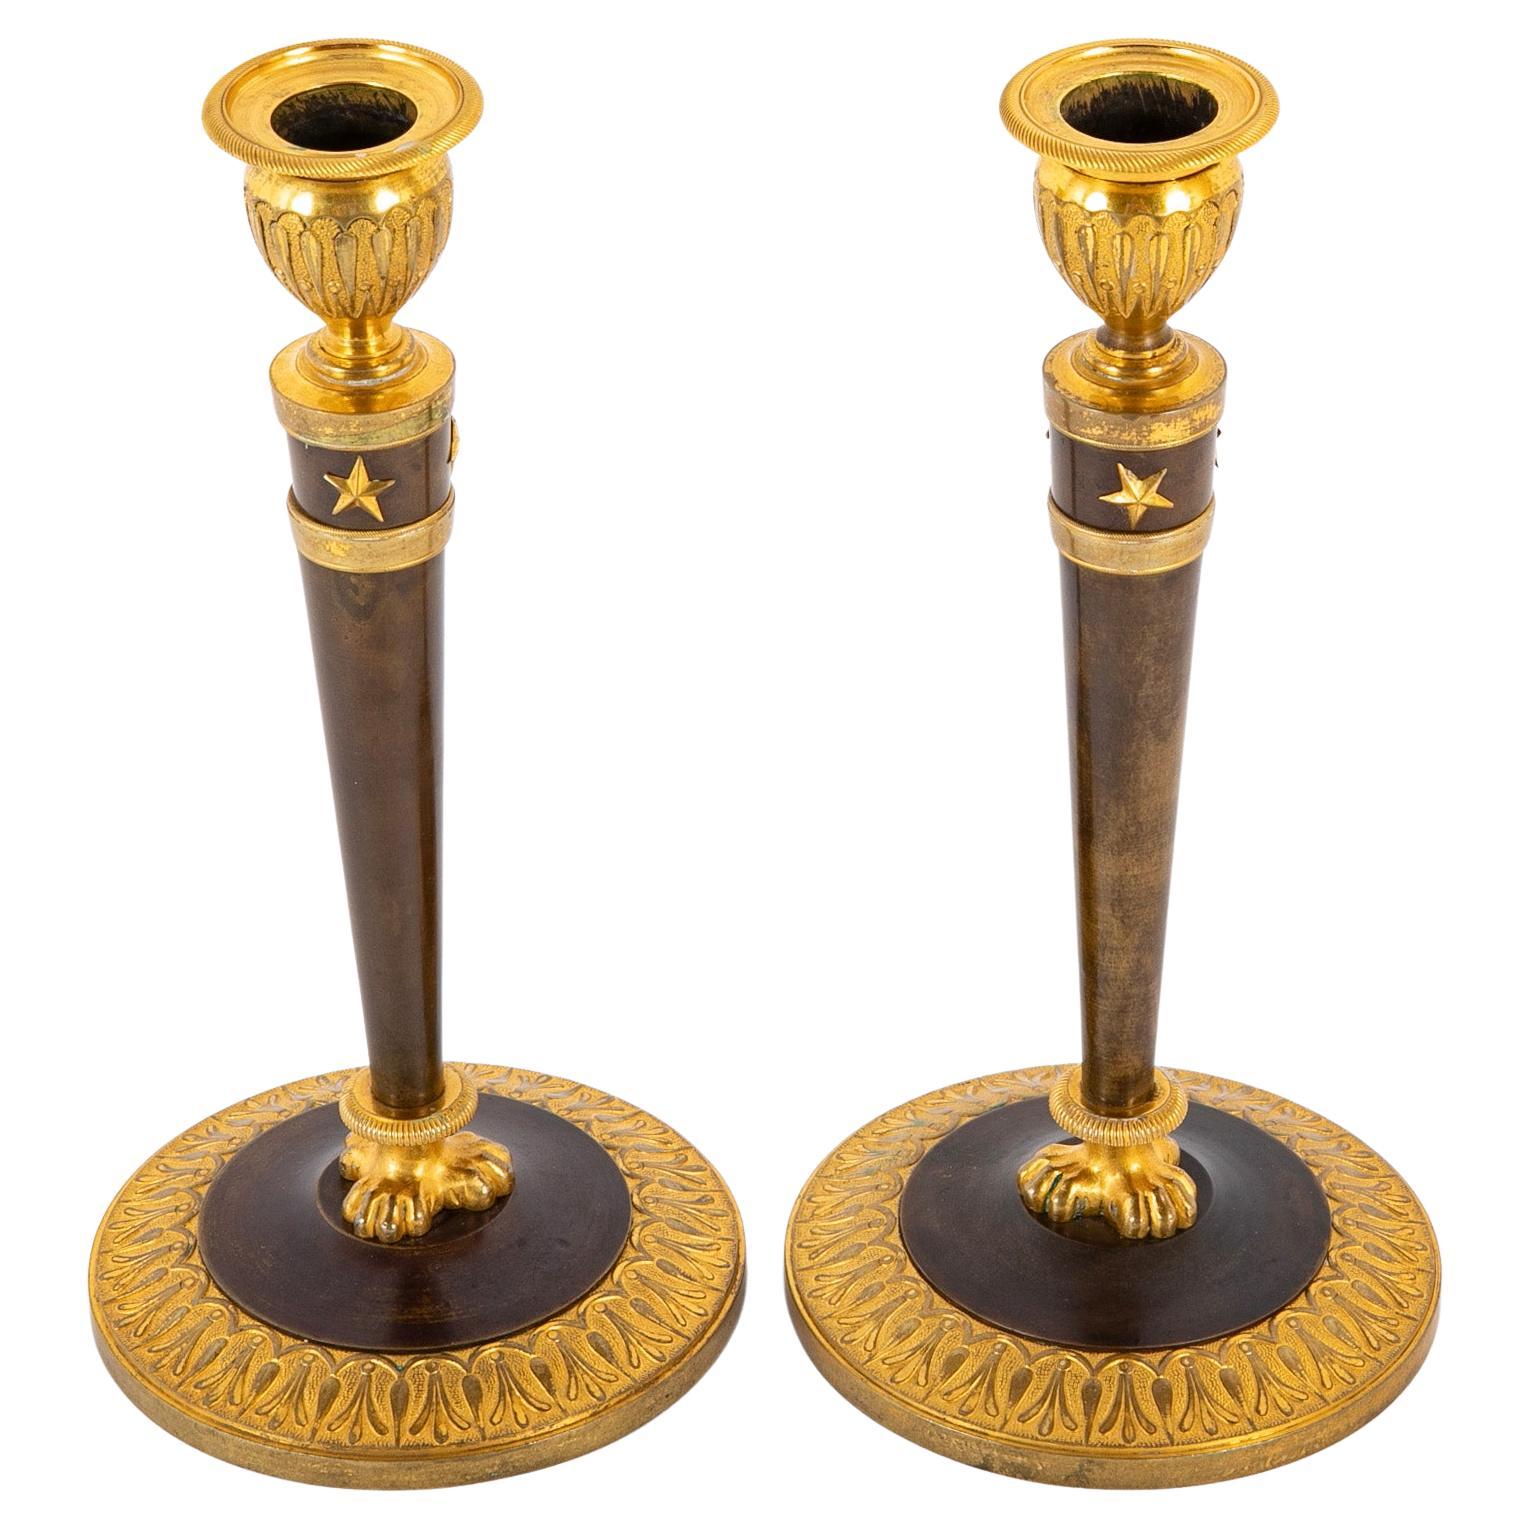 A Pair of French 19th Century Empire Candlesticks